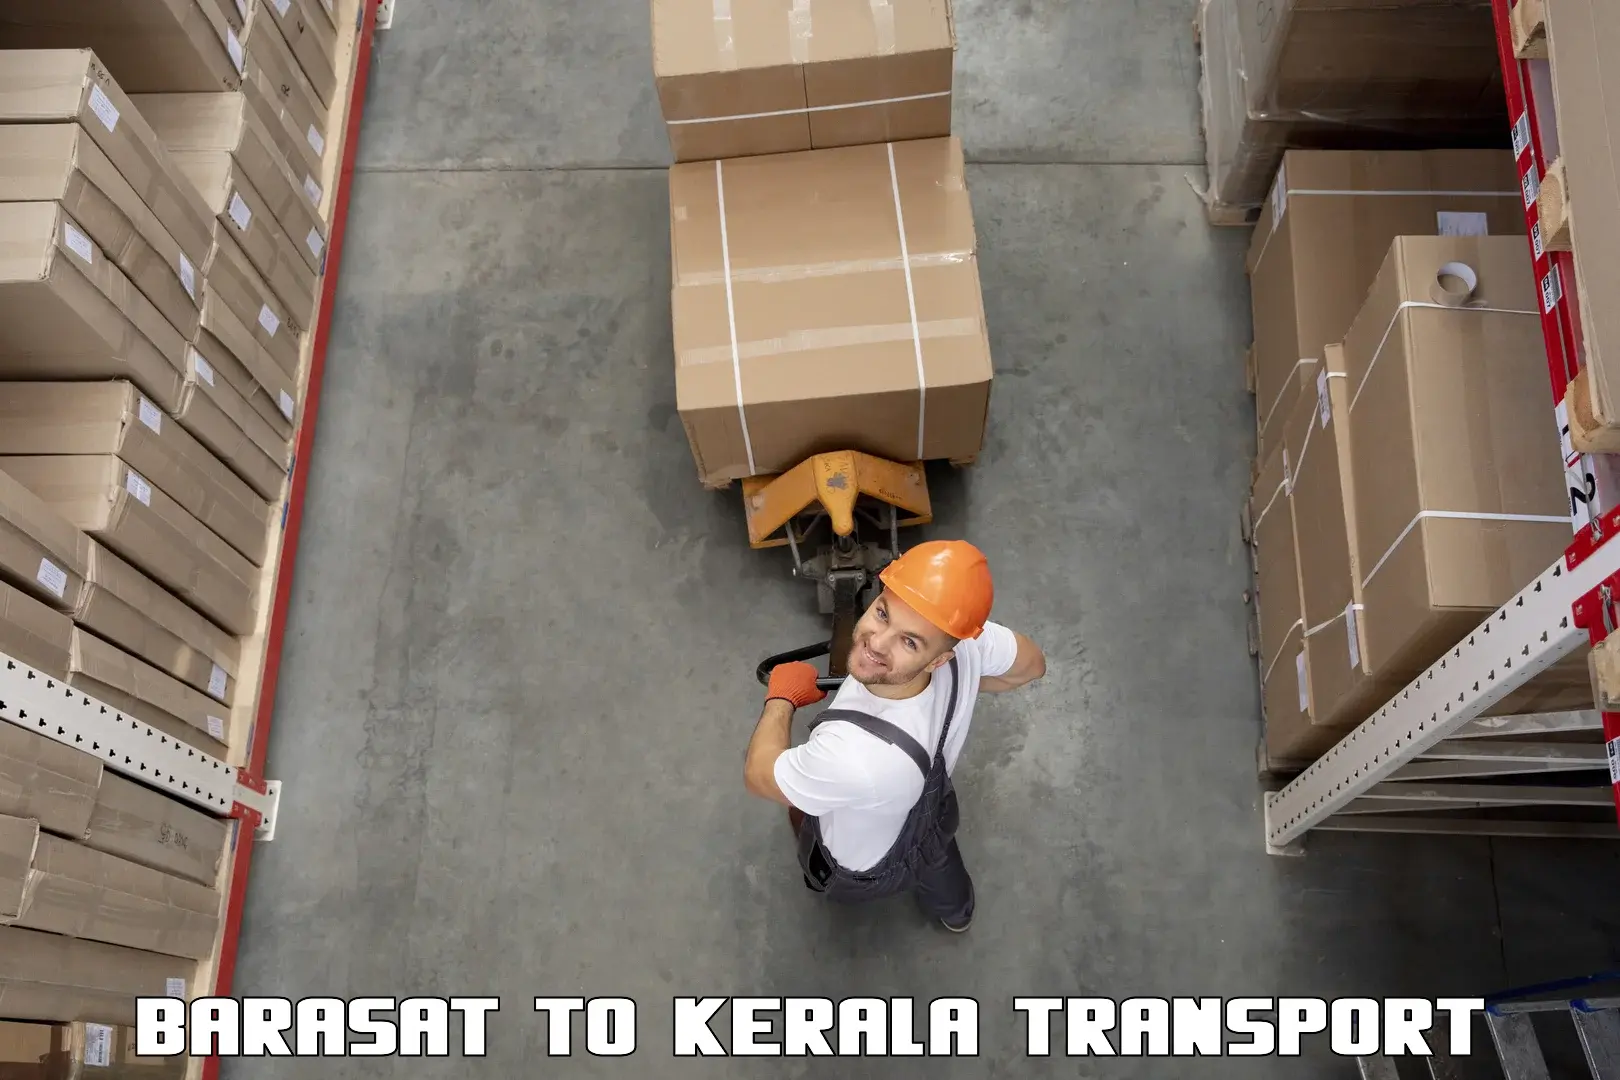 Truck transport companies in India Barasat to Mahe